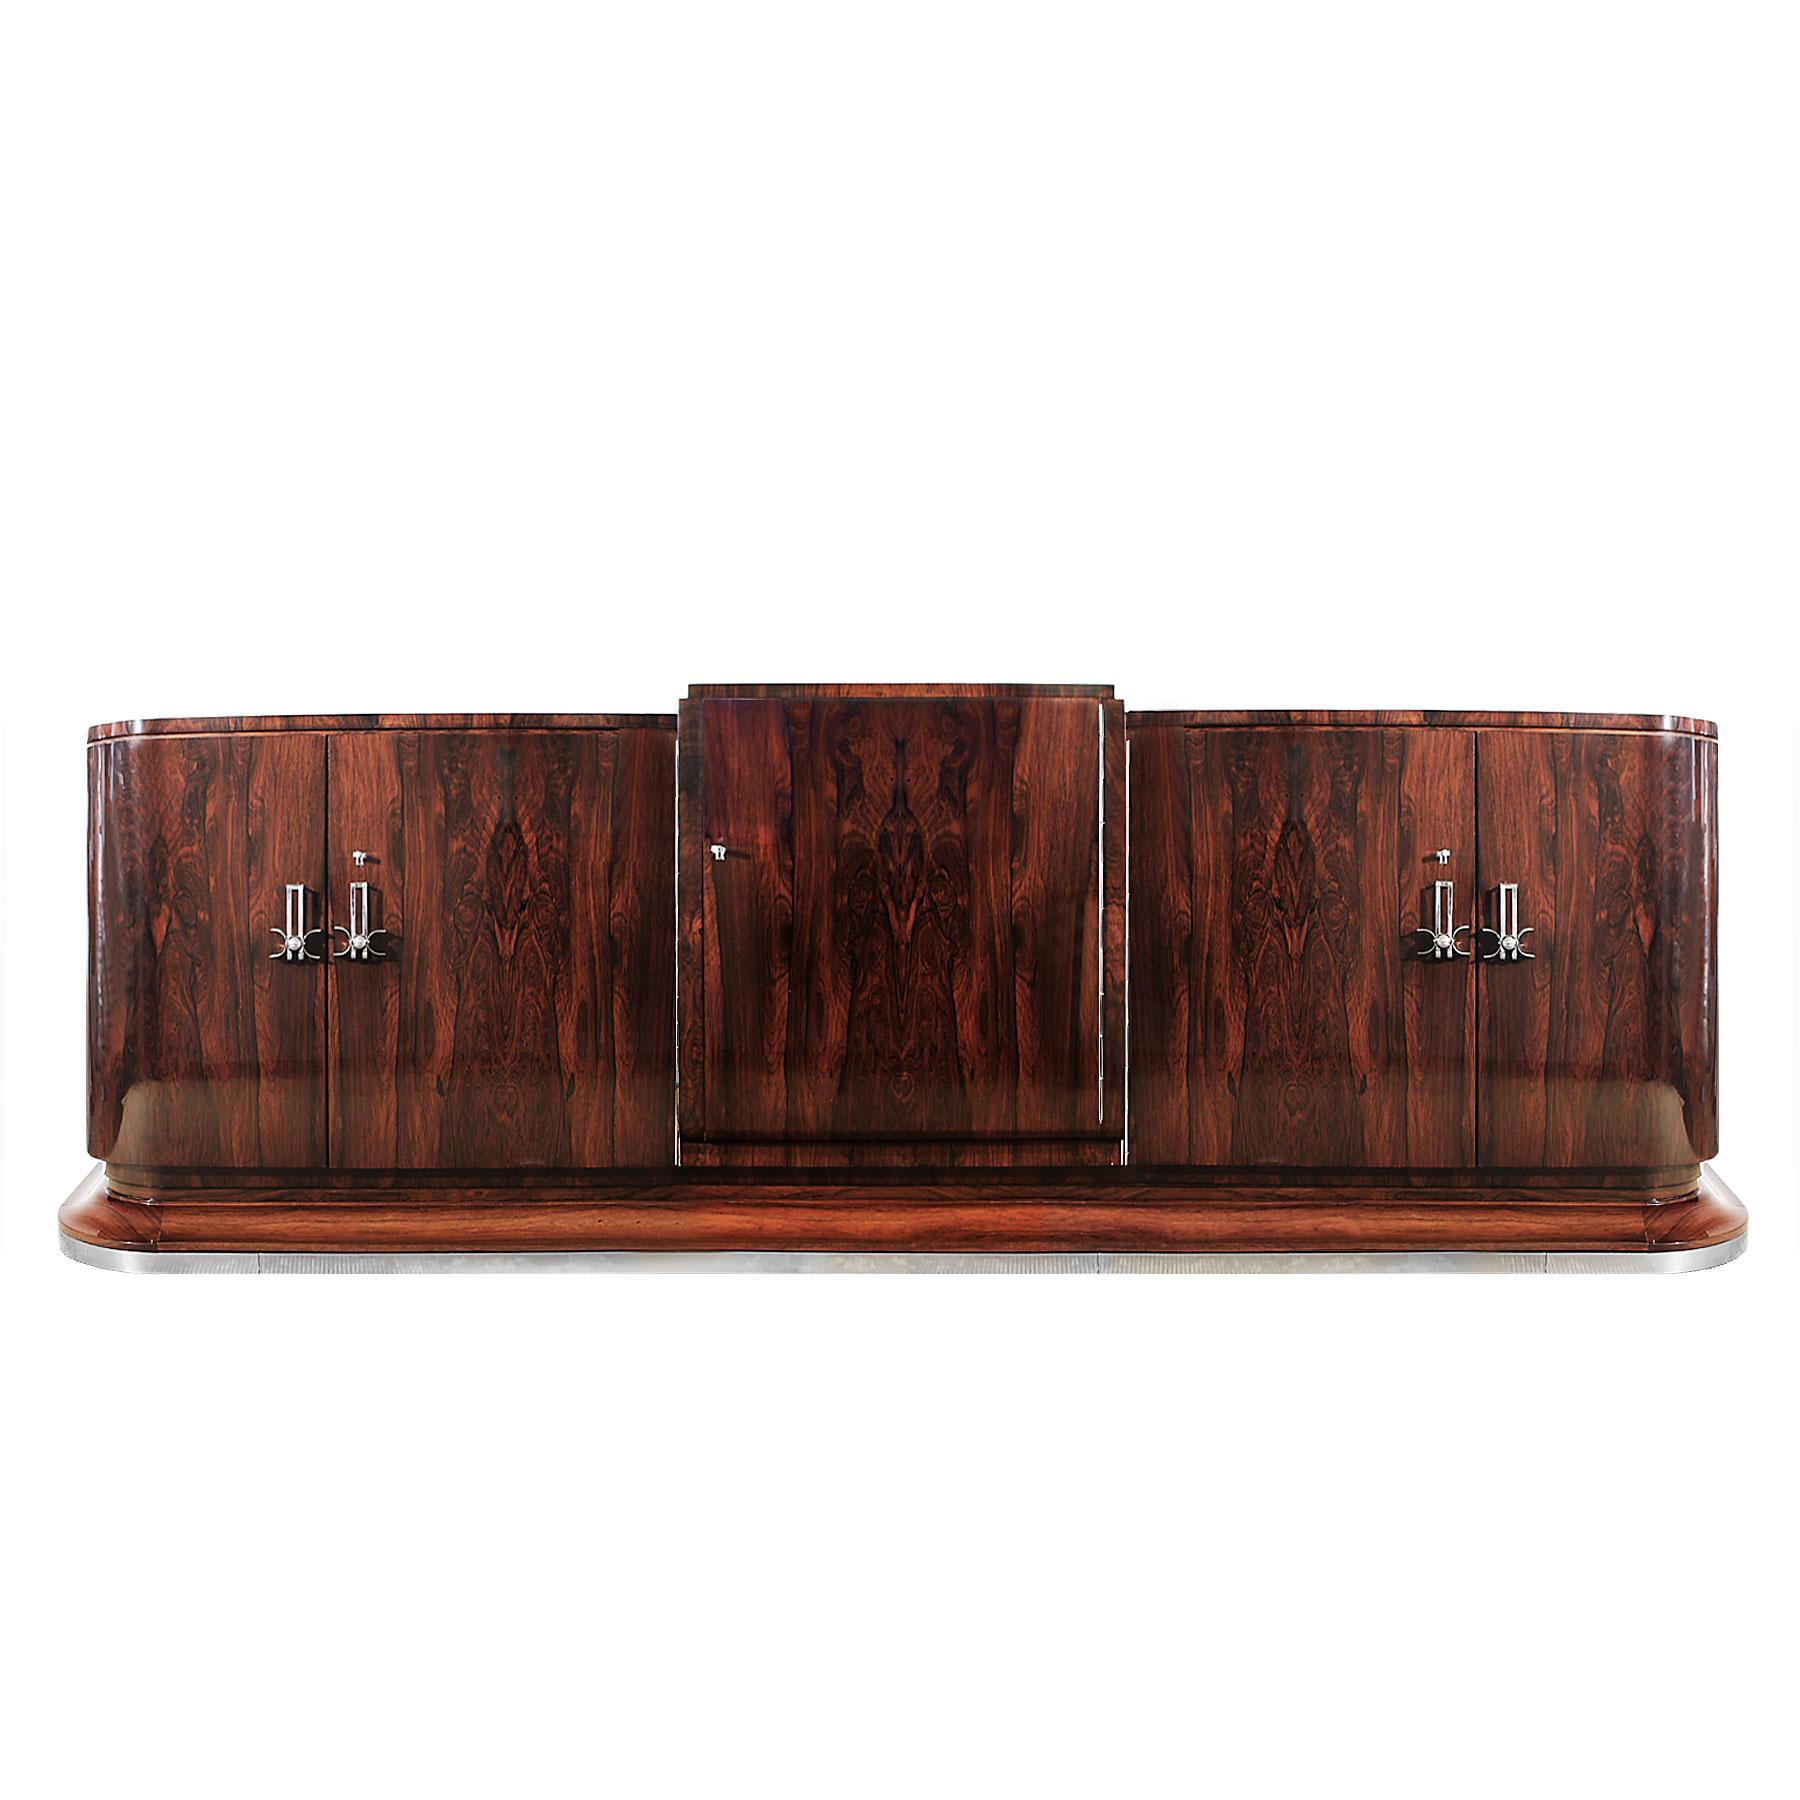 Exceptional Art Deco sideboard, mahogany veneer, 3 blocks, in the middle 5 cutlery drawers in sycamore with satin nickel plated metal handles, on both sides 3 shelves, ash wood veneer and ebony marquetry, doors with mahogany veneer inside, solid